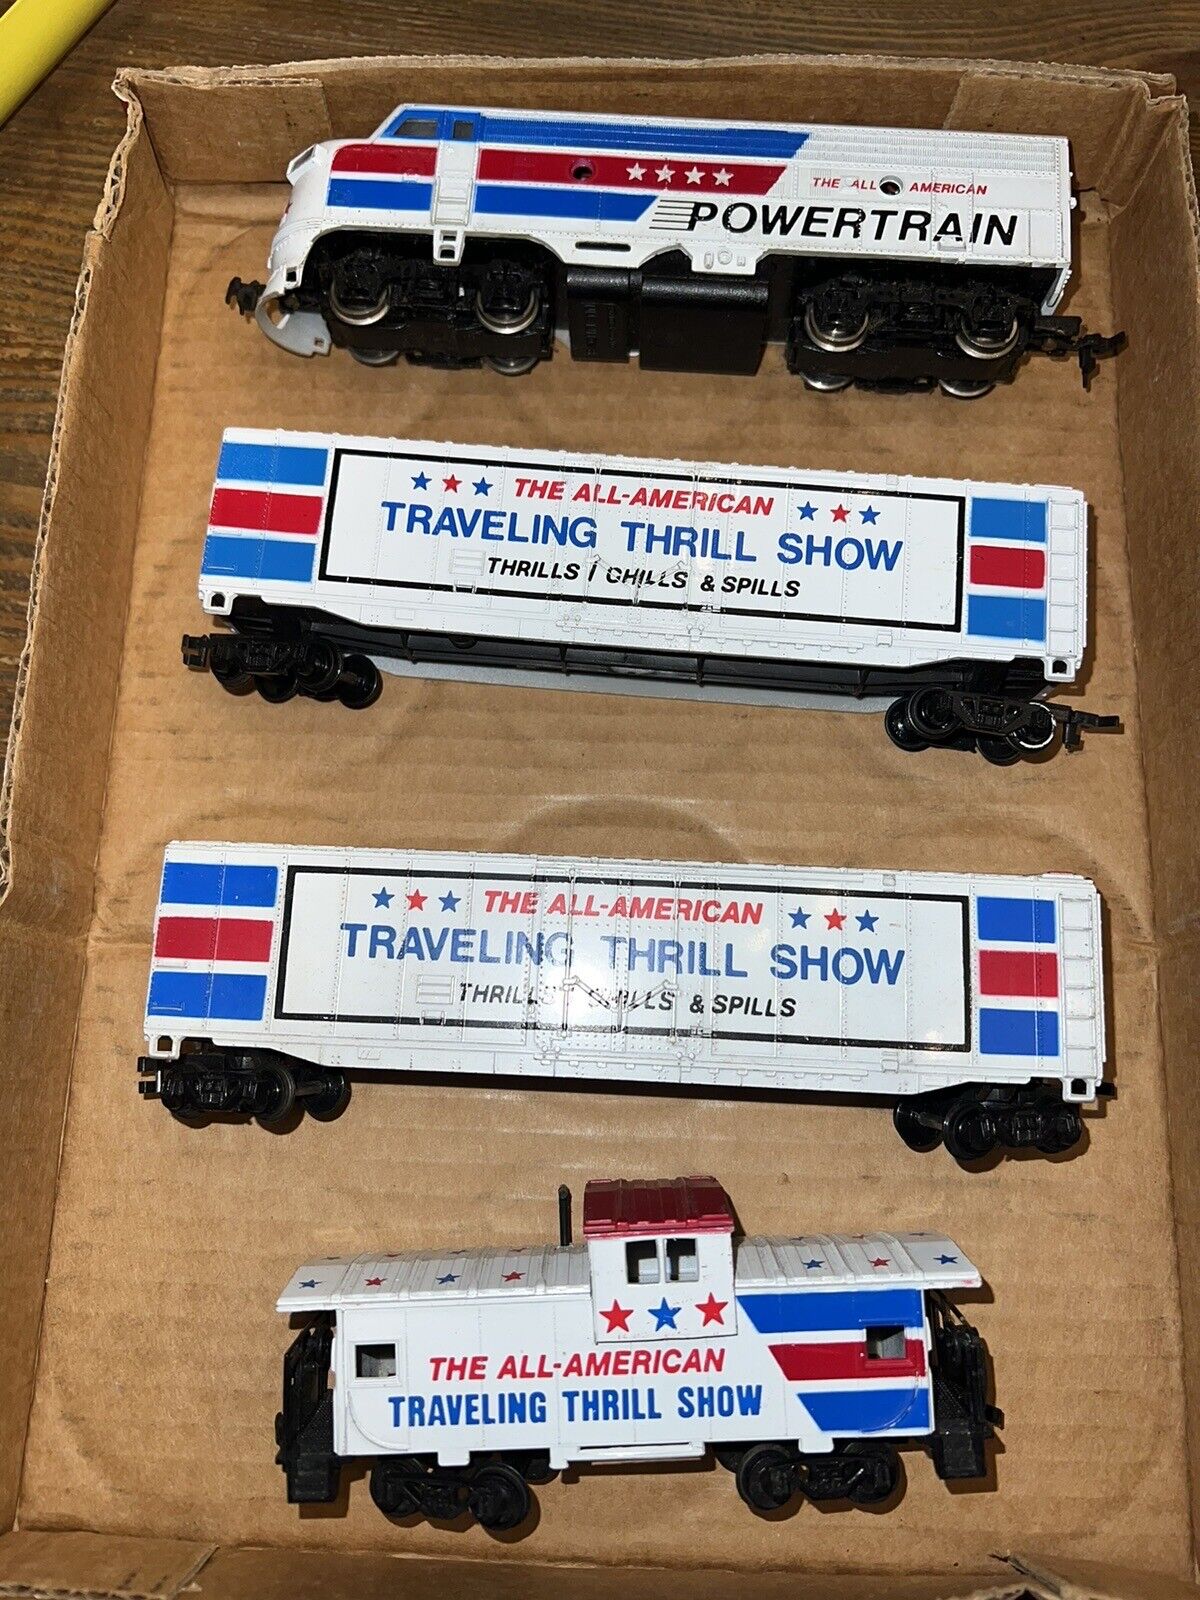 HO Scale Train: The All-American Traveling Thrill Show Loco-Box Cars Caboose